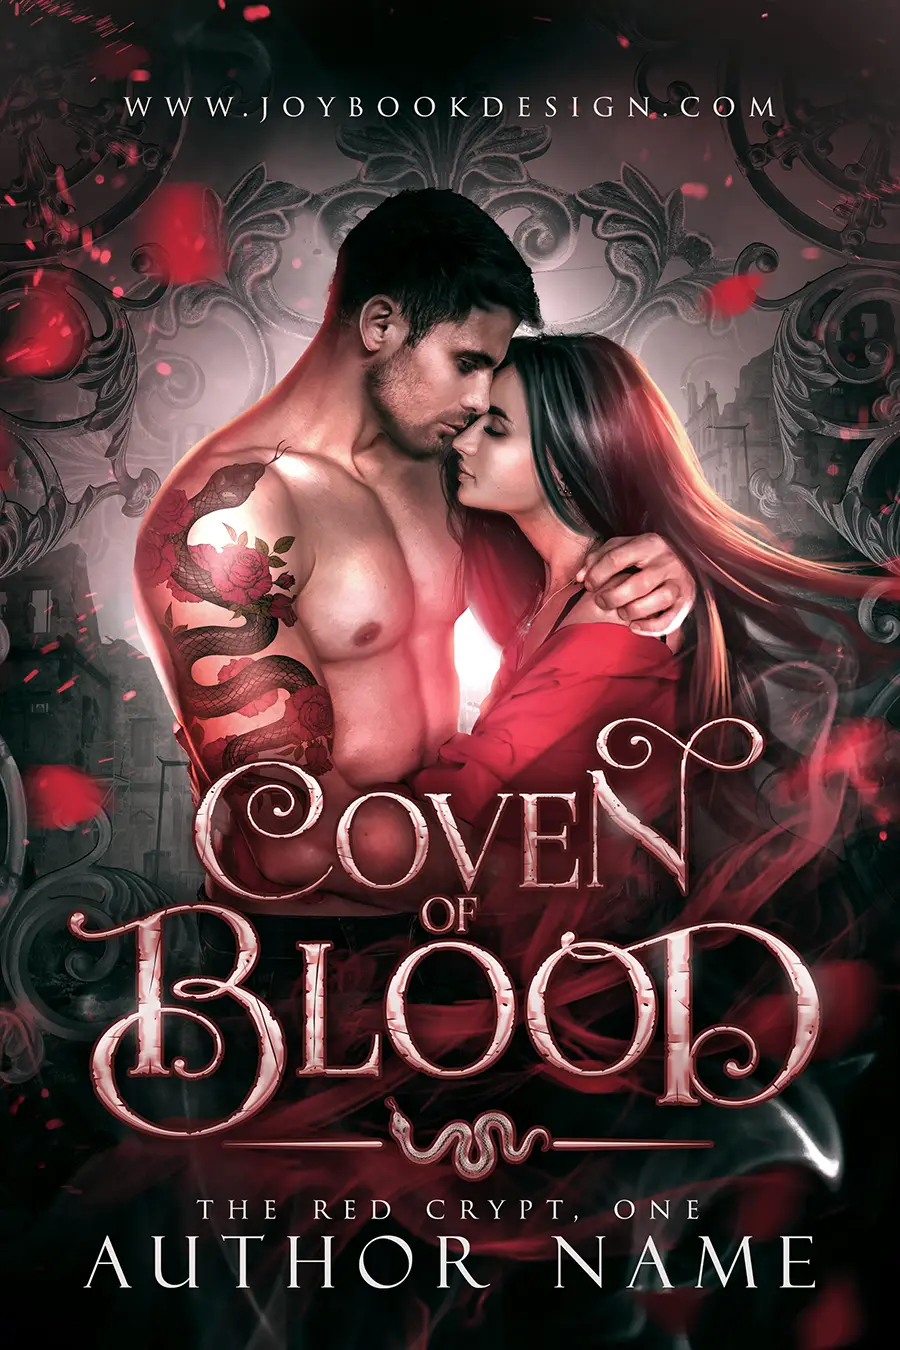 Coven of Blood